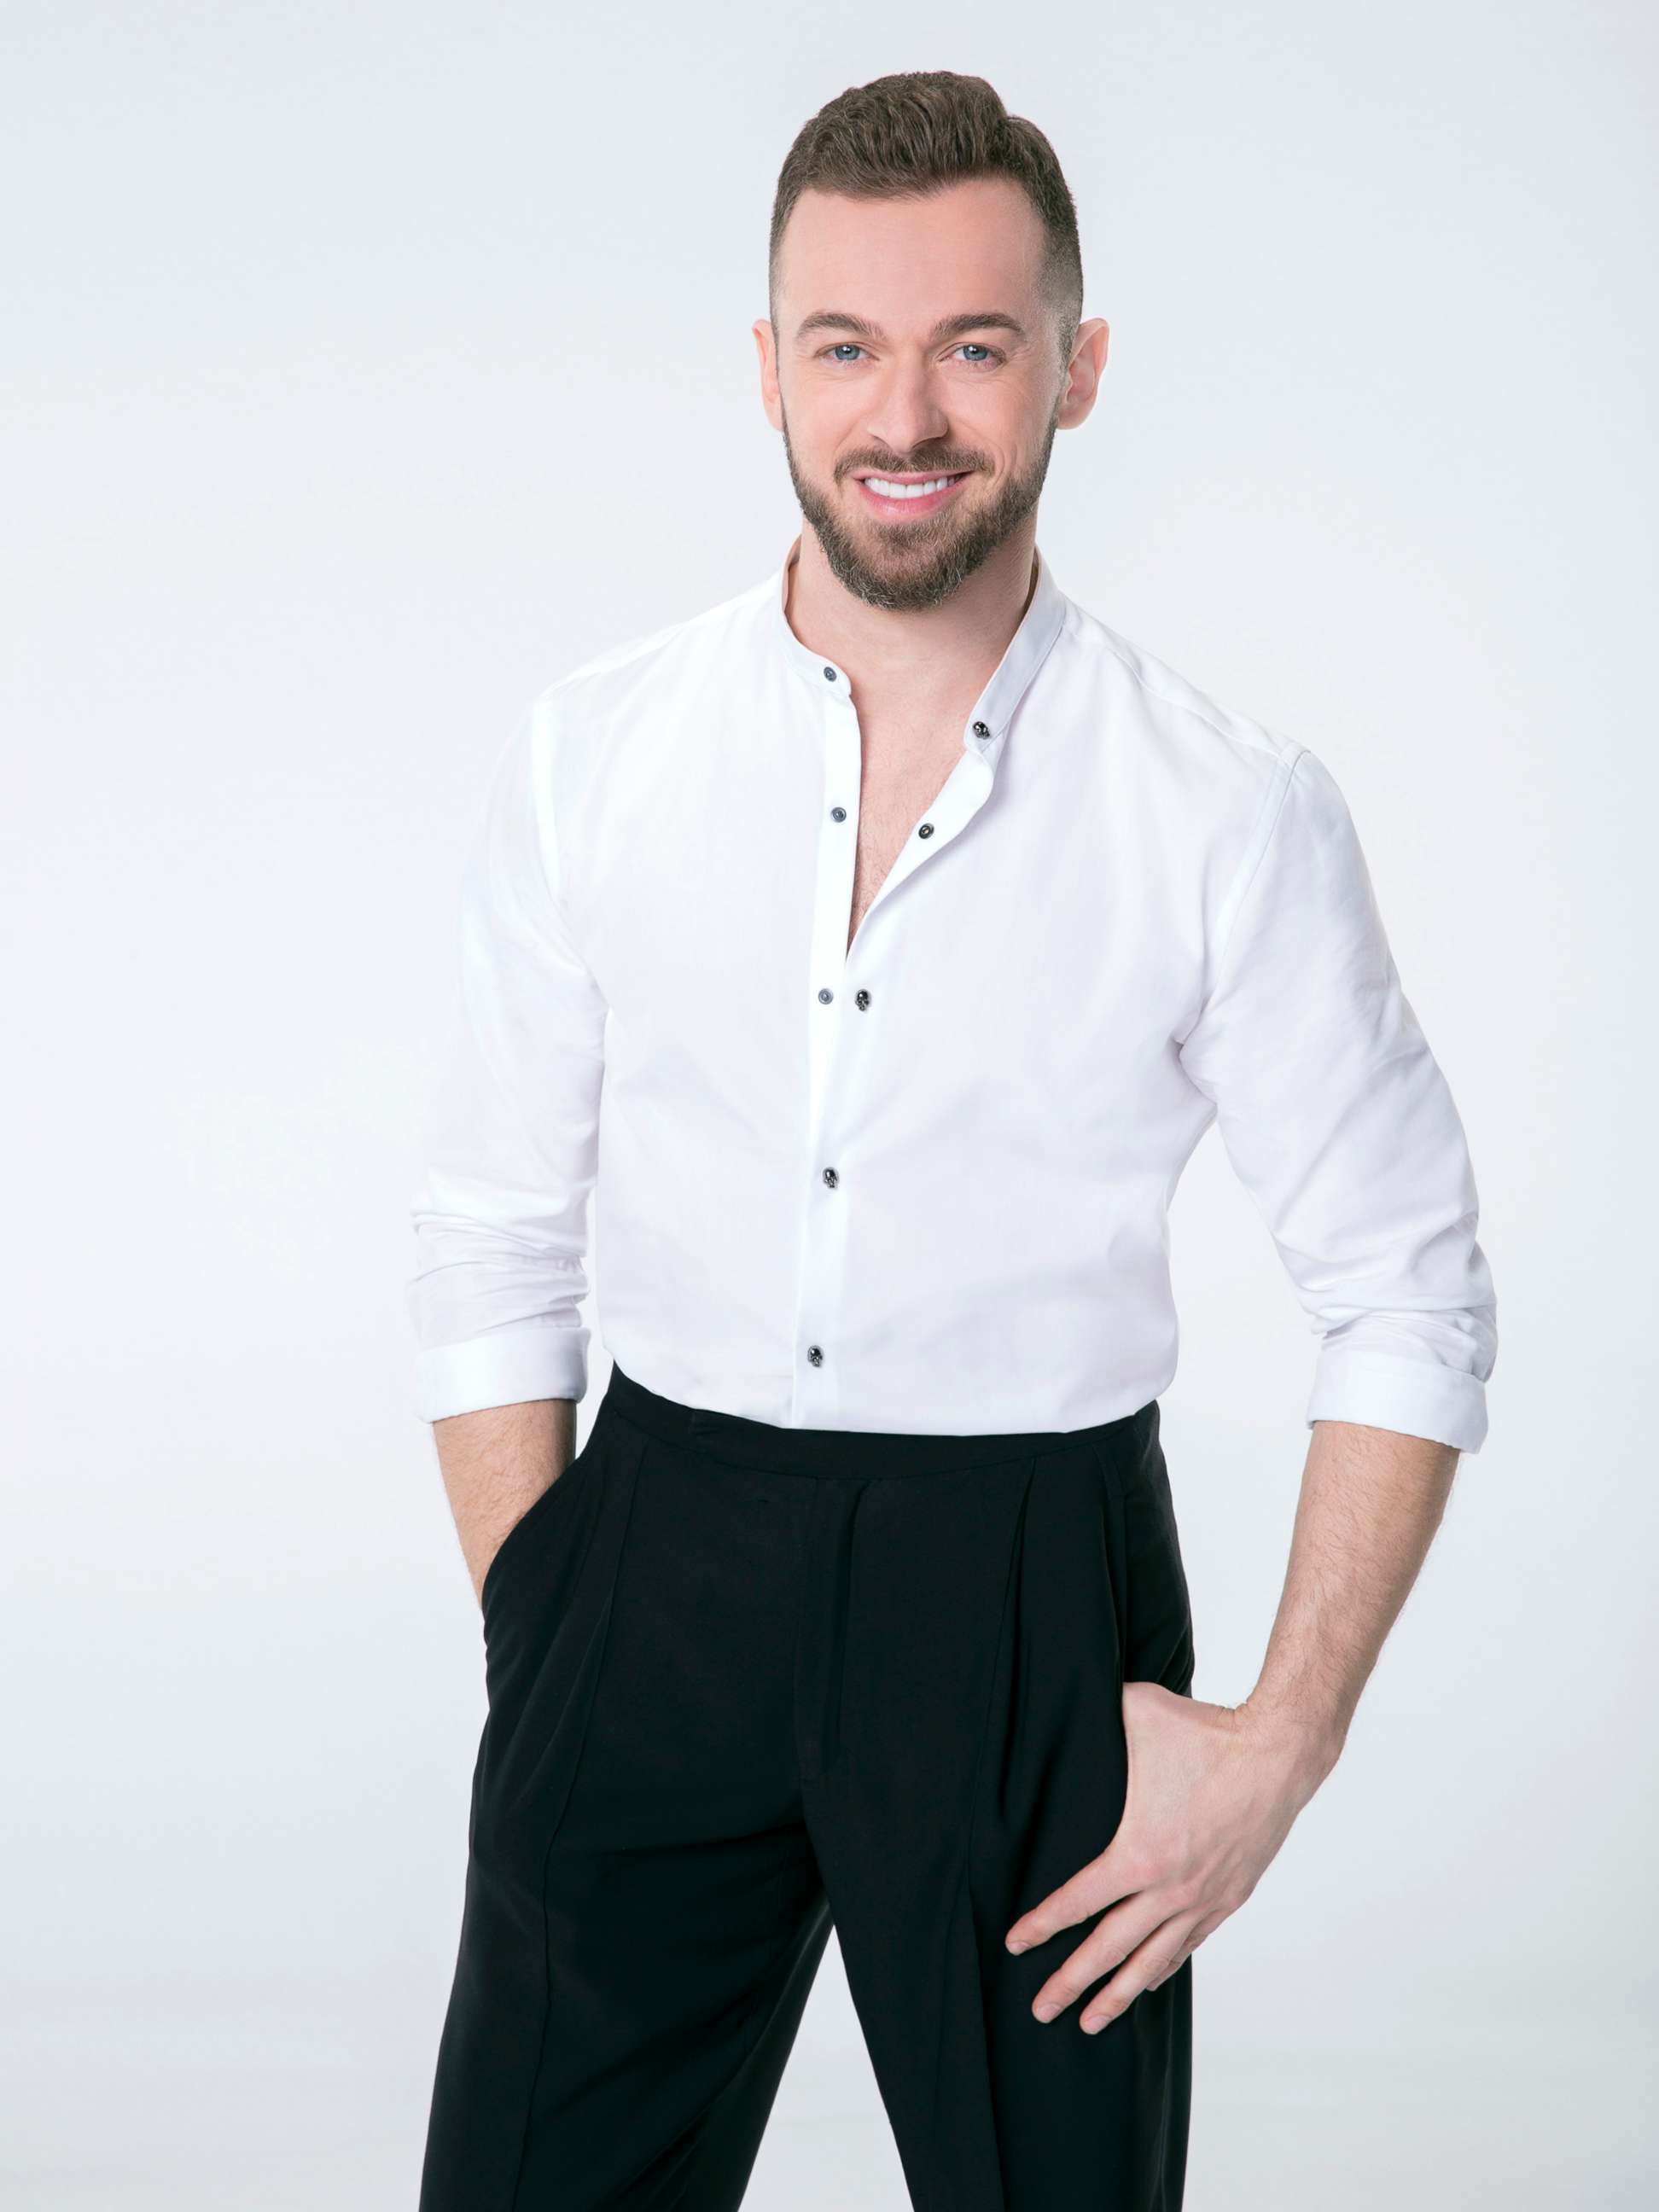 PHOTO: Pro dancer Artem Chigvintsev will appear on "Dancing With The Stars."